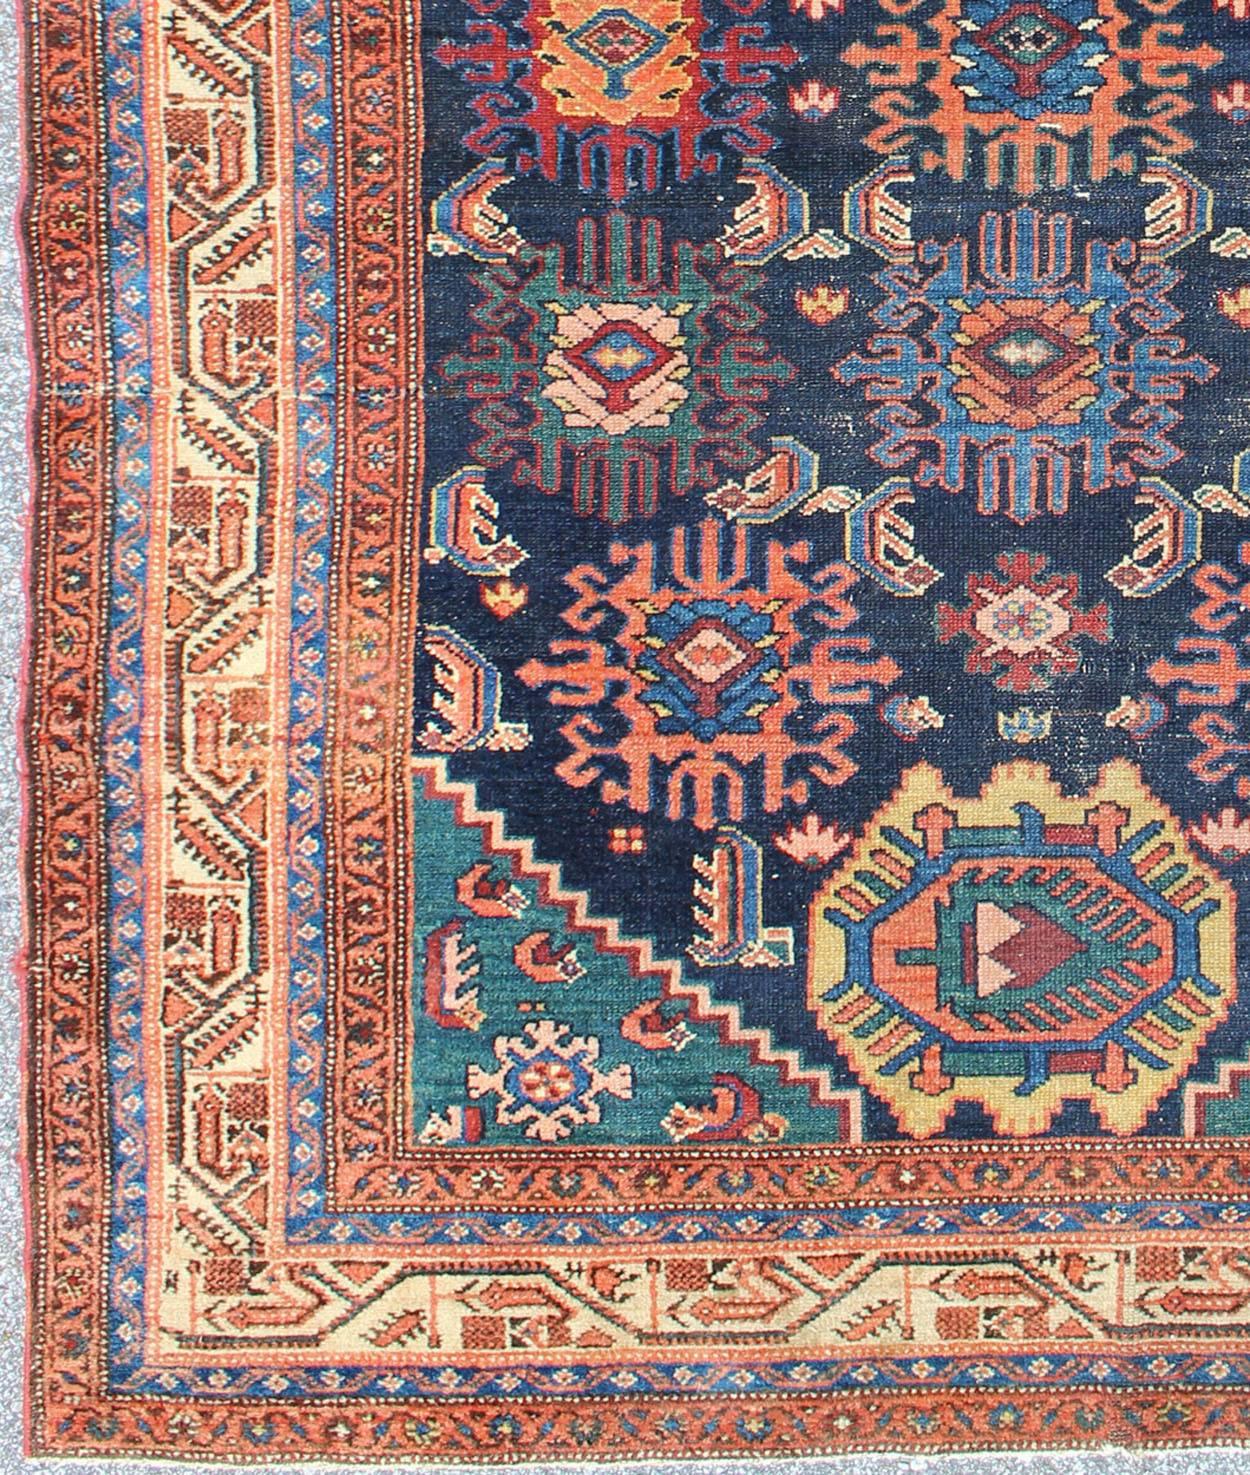 Antique Persian Malayer Carpet with Colorful, All-Over Sub-Geometric Design, rug 17-0601, country of origin / type: Iran / Malayer, circa 1910. This magnificent antique Persian Malayer carpet bears a beautiful, all-over sub-geometric design paired